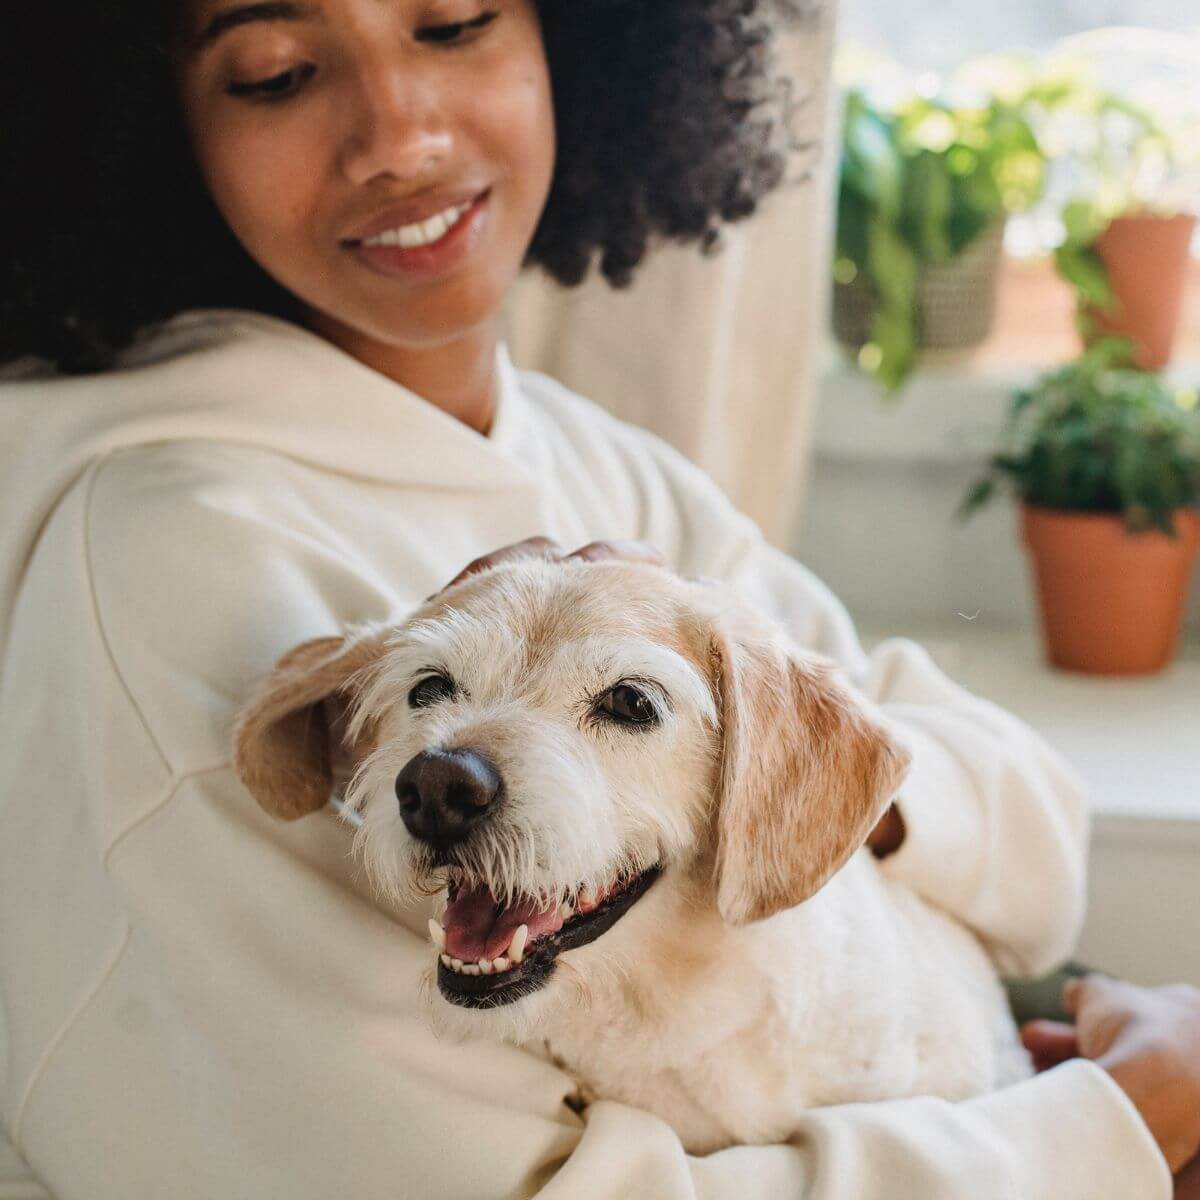 Senior Dog Care Guide: Ensuring Your Dog's Health and Happiness in their Golden Years